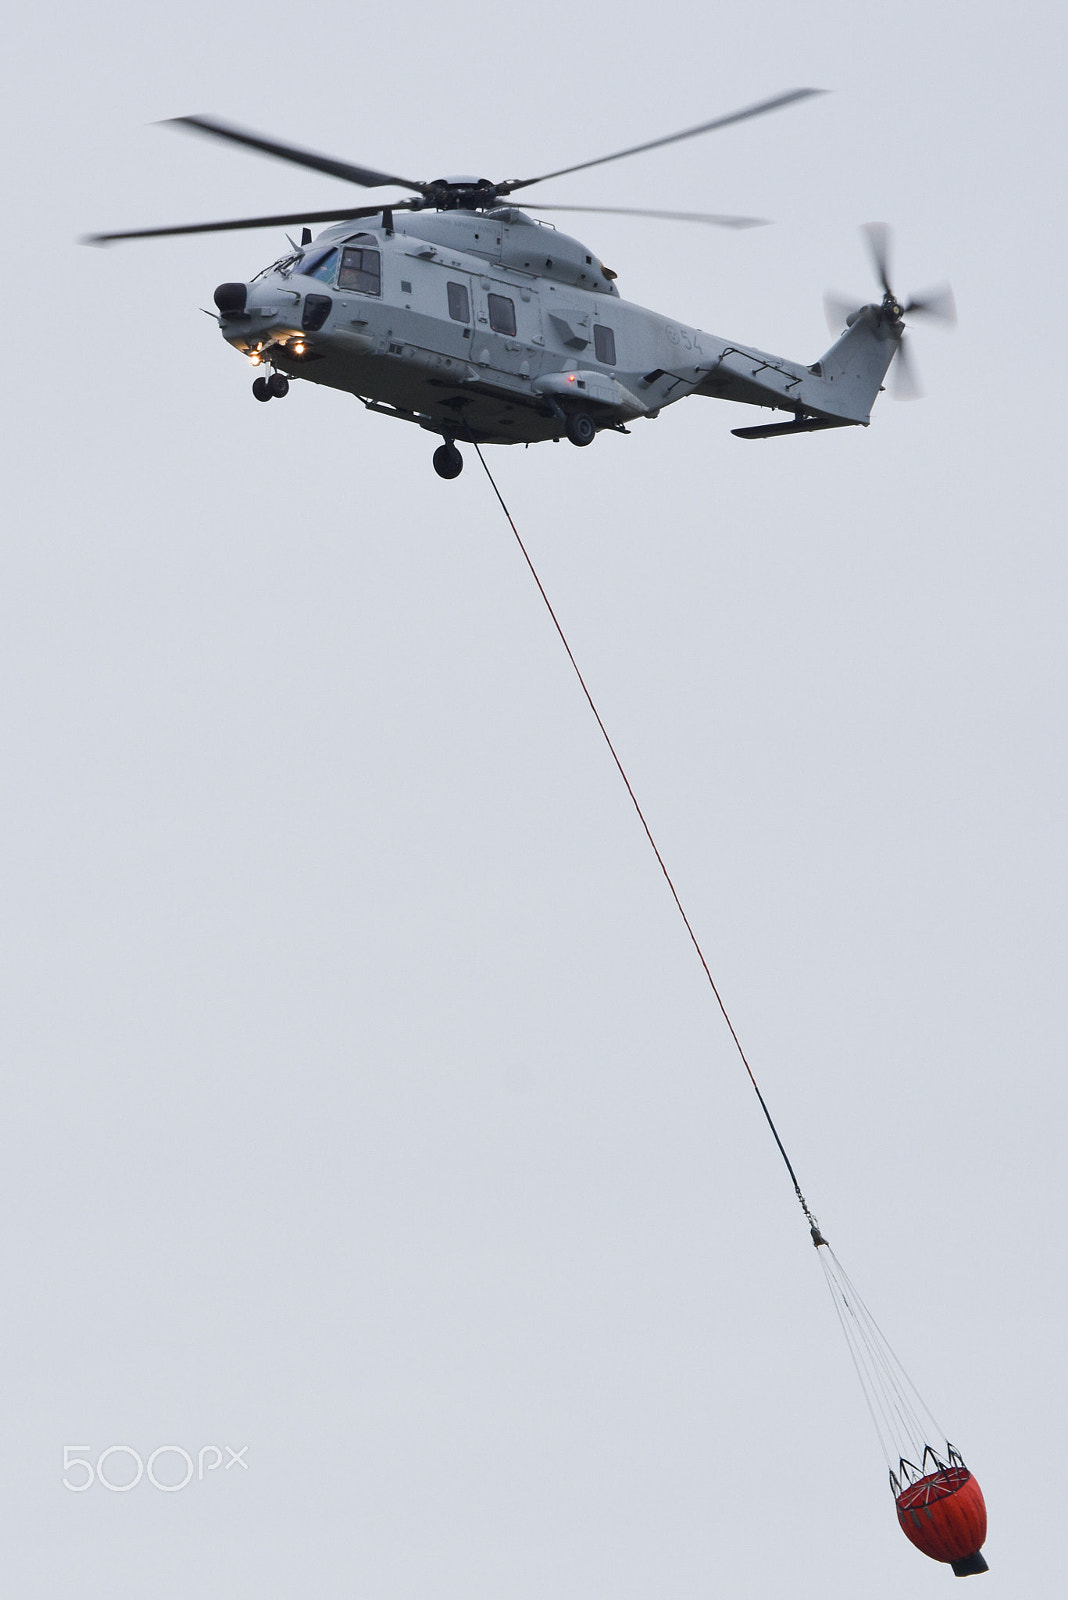 Nikon D7200 + Tamron SP 150-600mm F5-6.3 Di VC USD sample photo. Nh90 on firefighting assignment photography